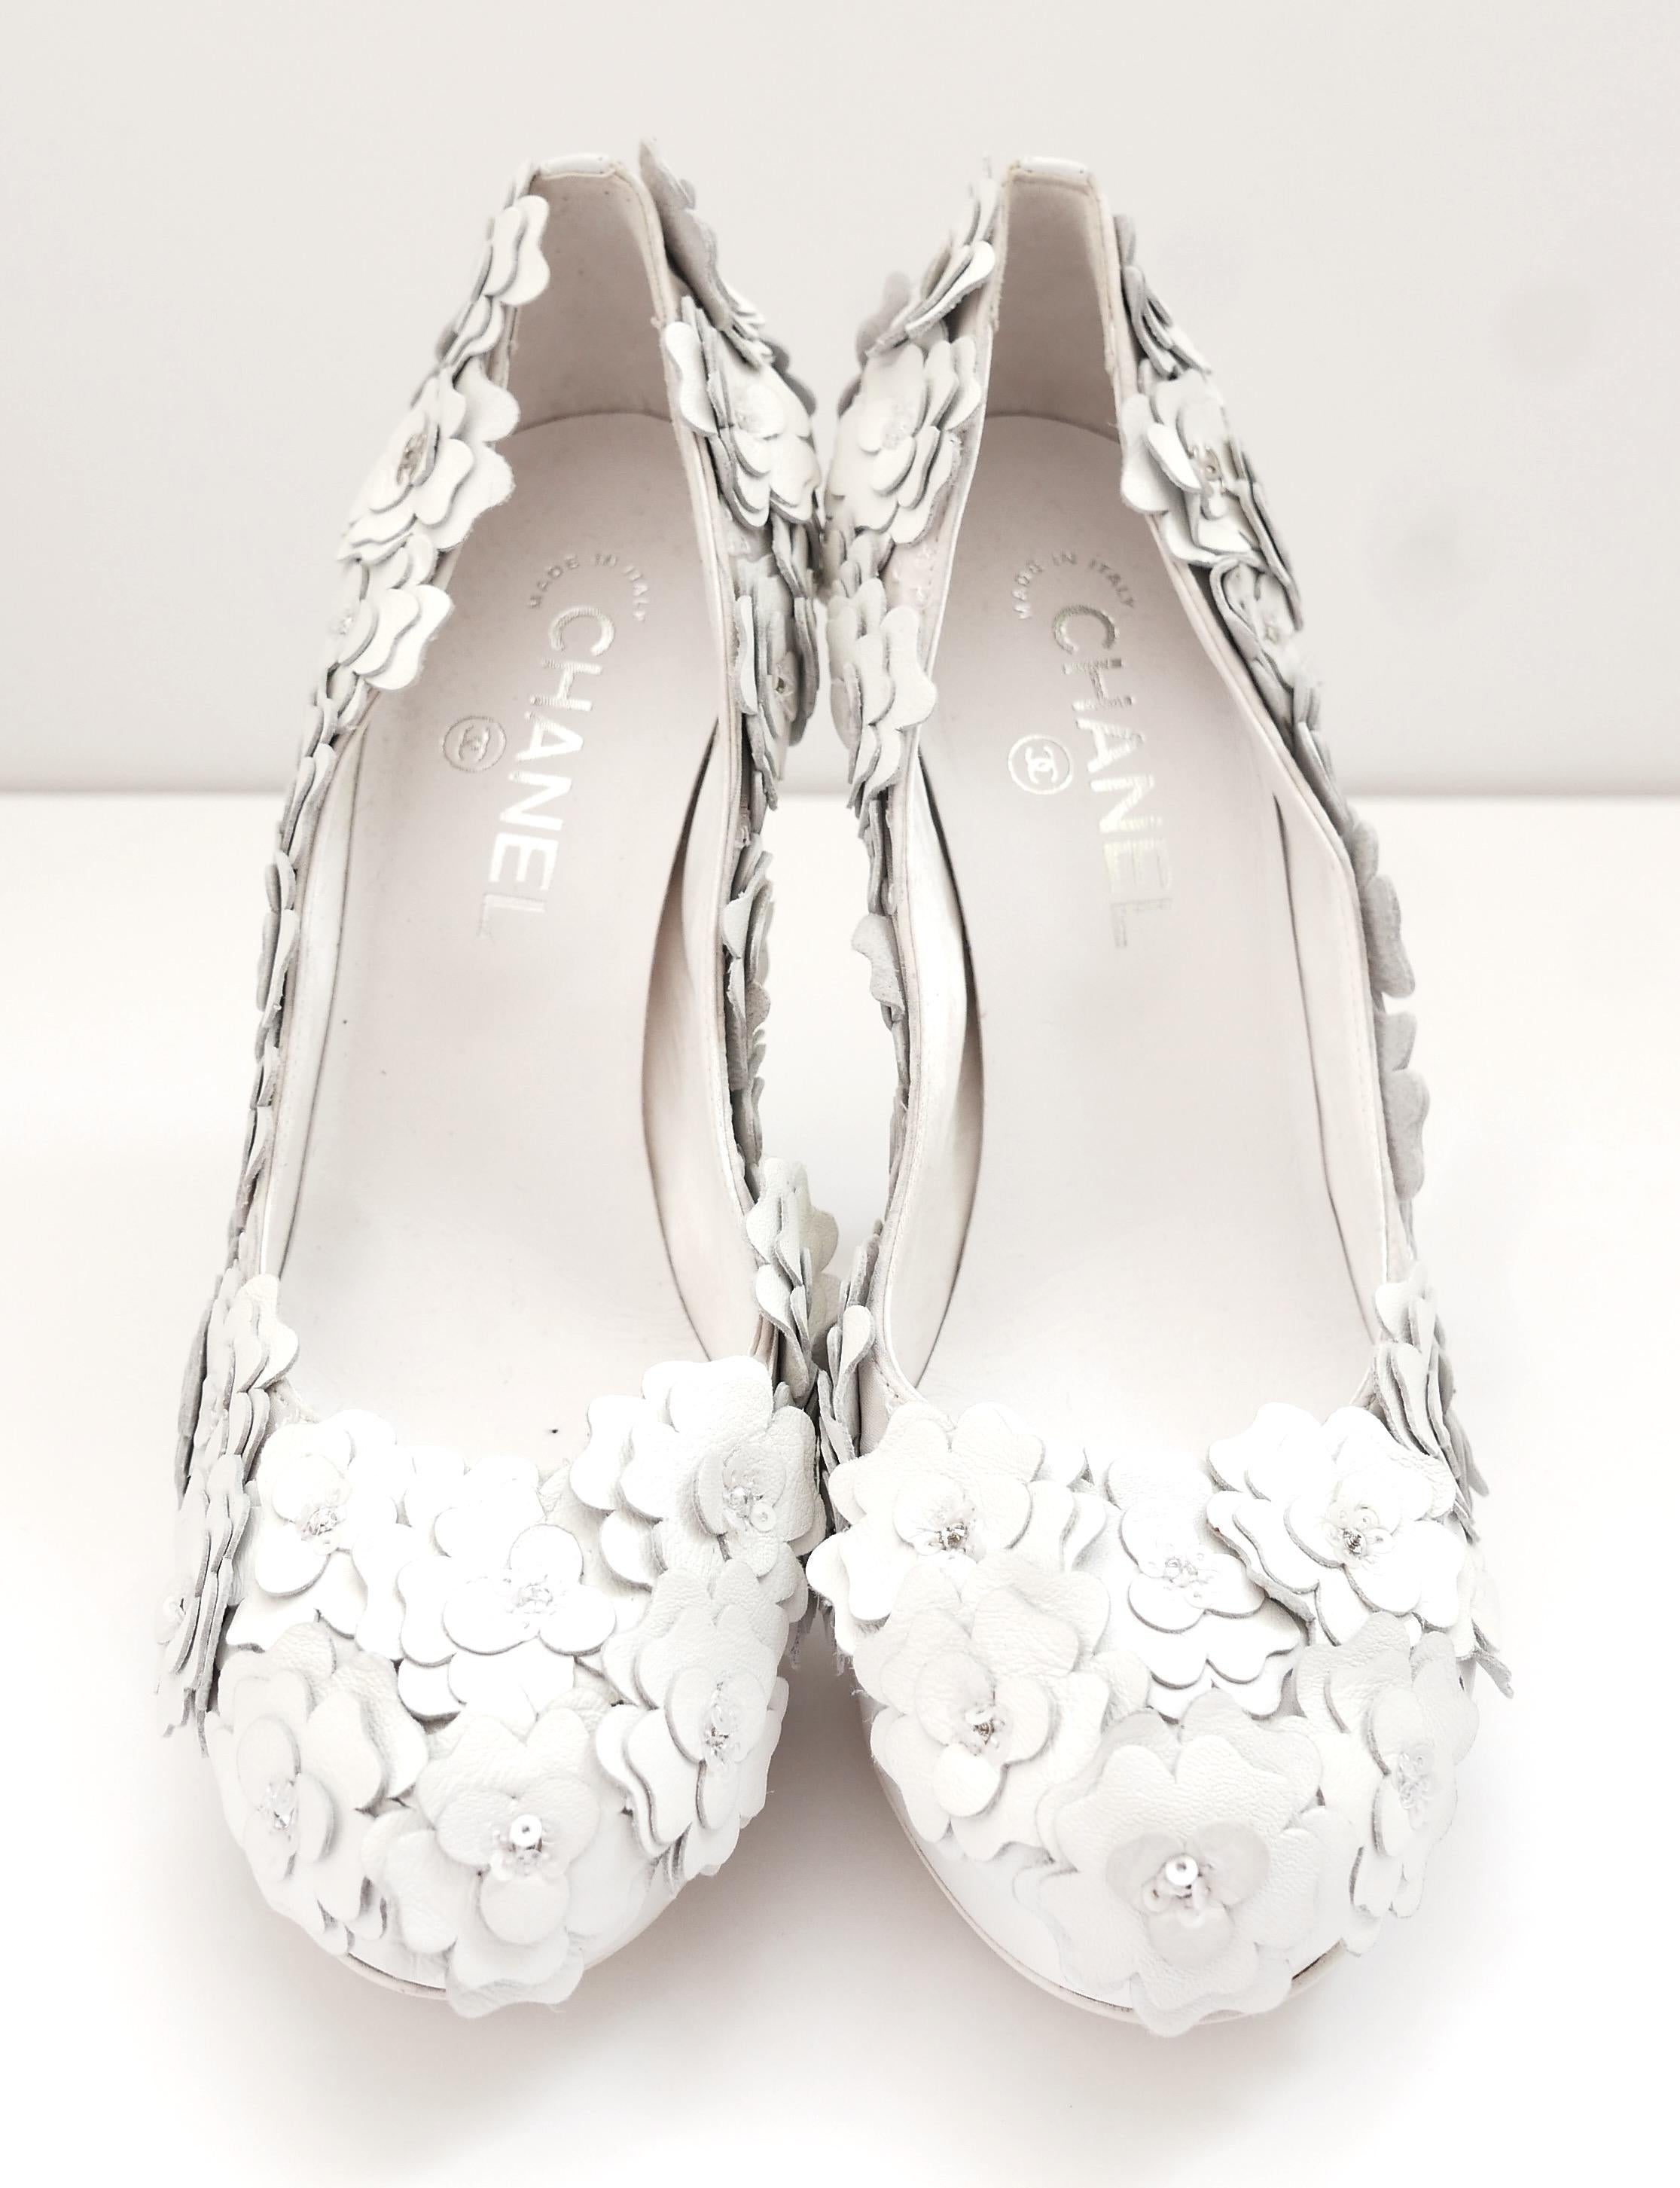 The MOST exquisite, work of art Chanel camellia heels from the Spring 2010 Collection. In unworn condition with dustbag. Collectors’ piece. 
Superbly crafted from thick white leather and satin with the most amazing, 3D, hand sewn leather and sequin